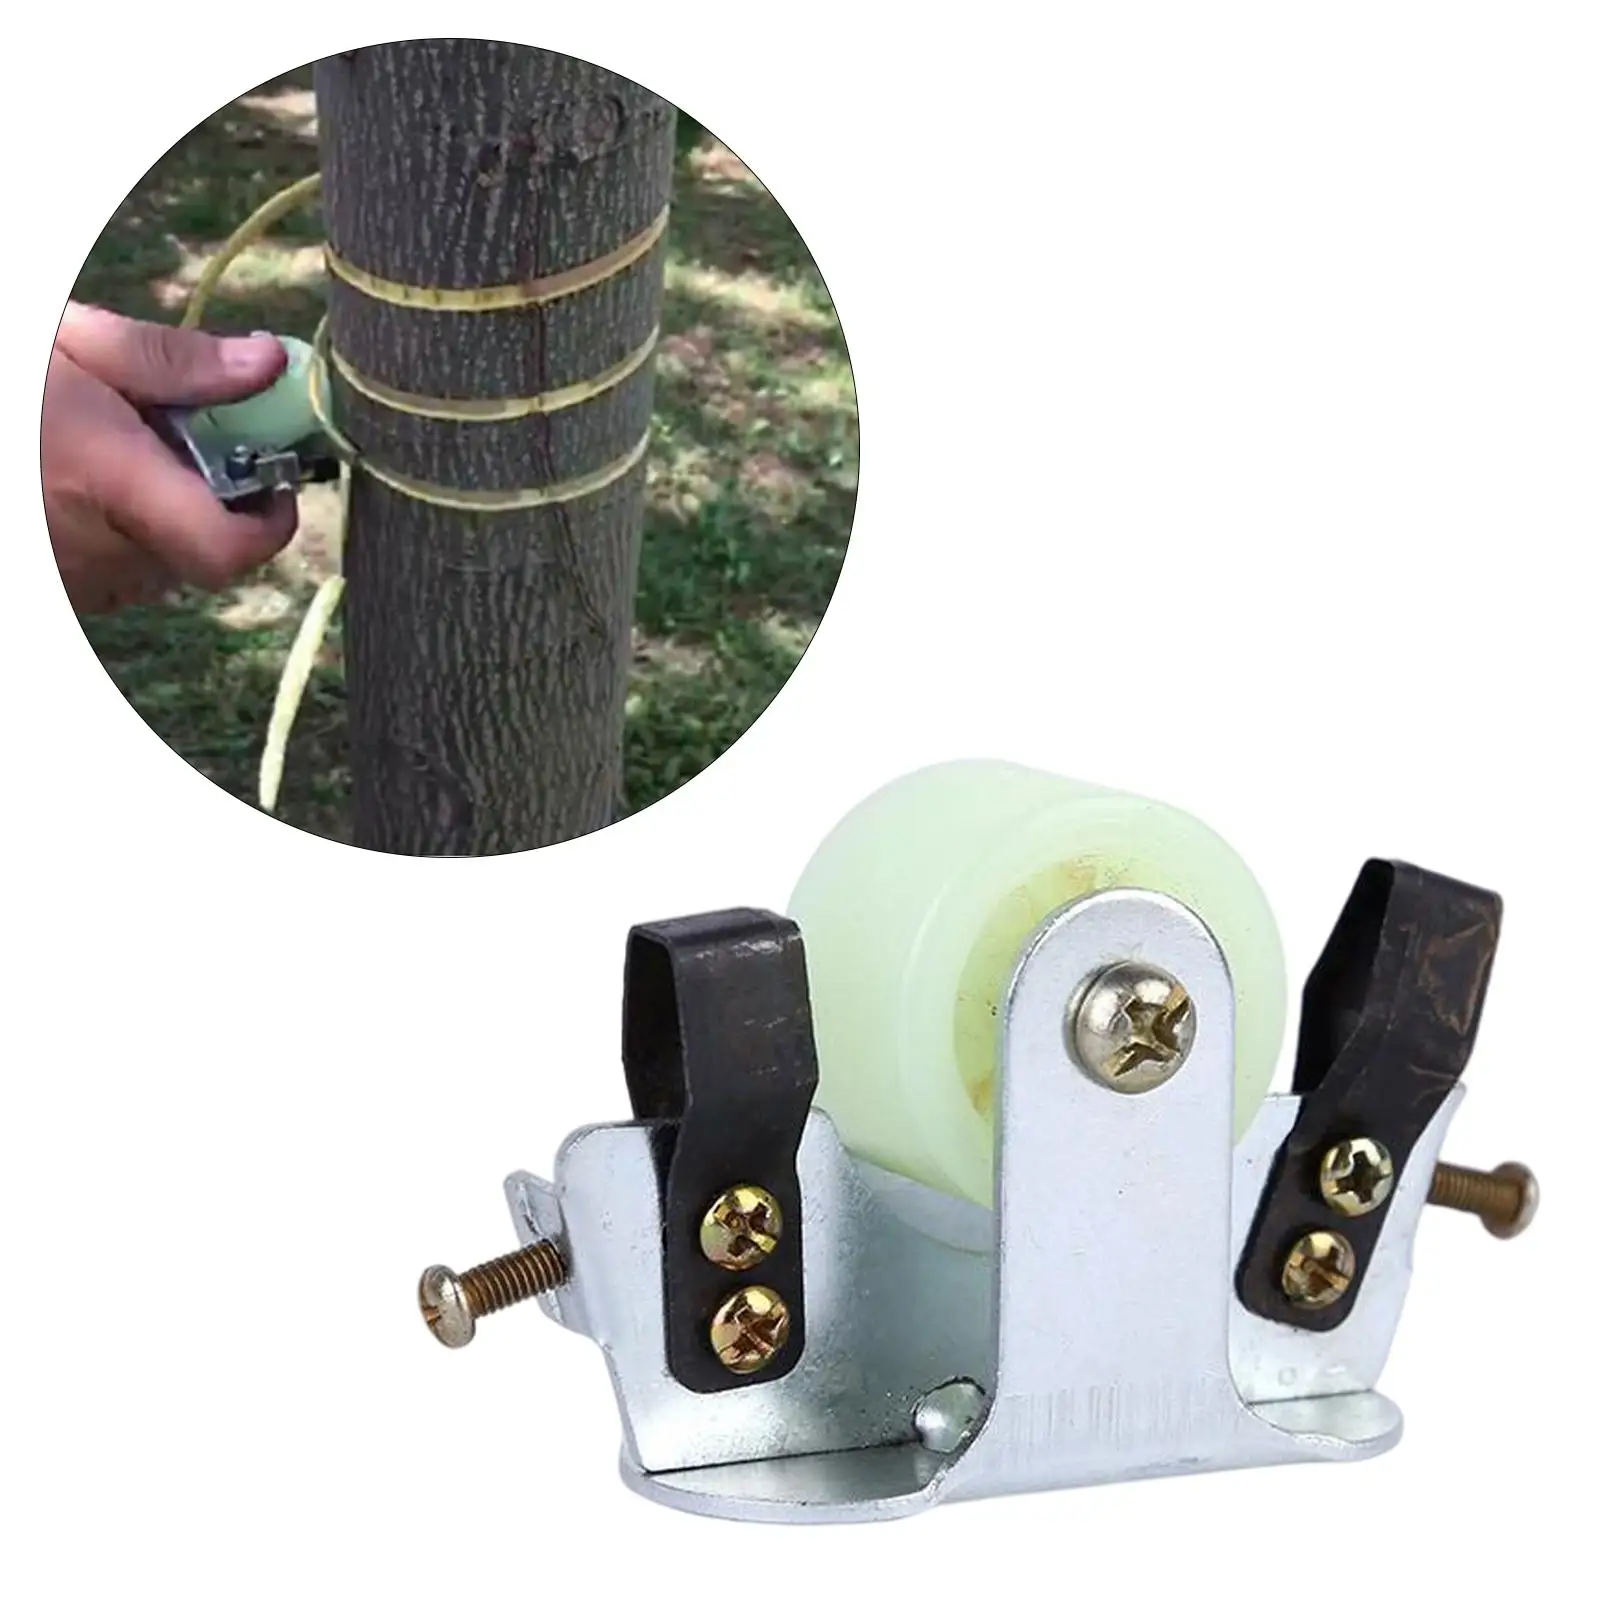  Peeling Tool for Tree Laurel with Wheel Cutter for Garden